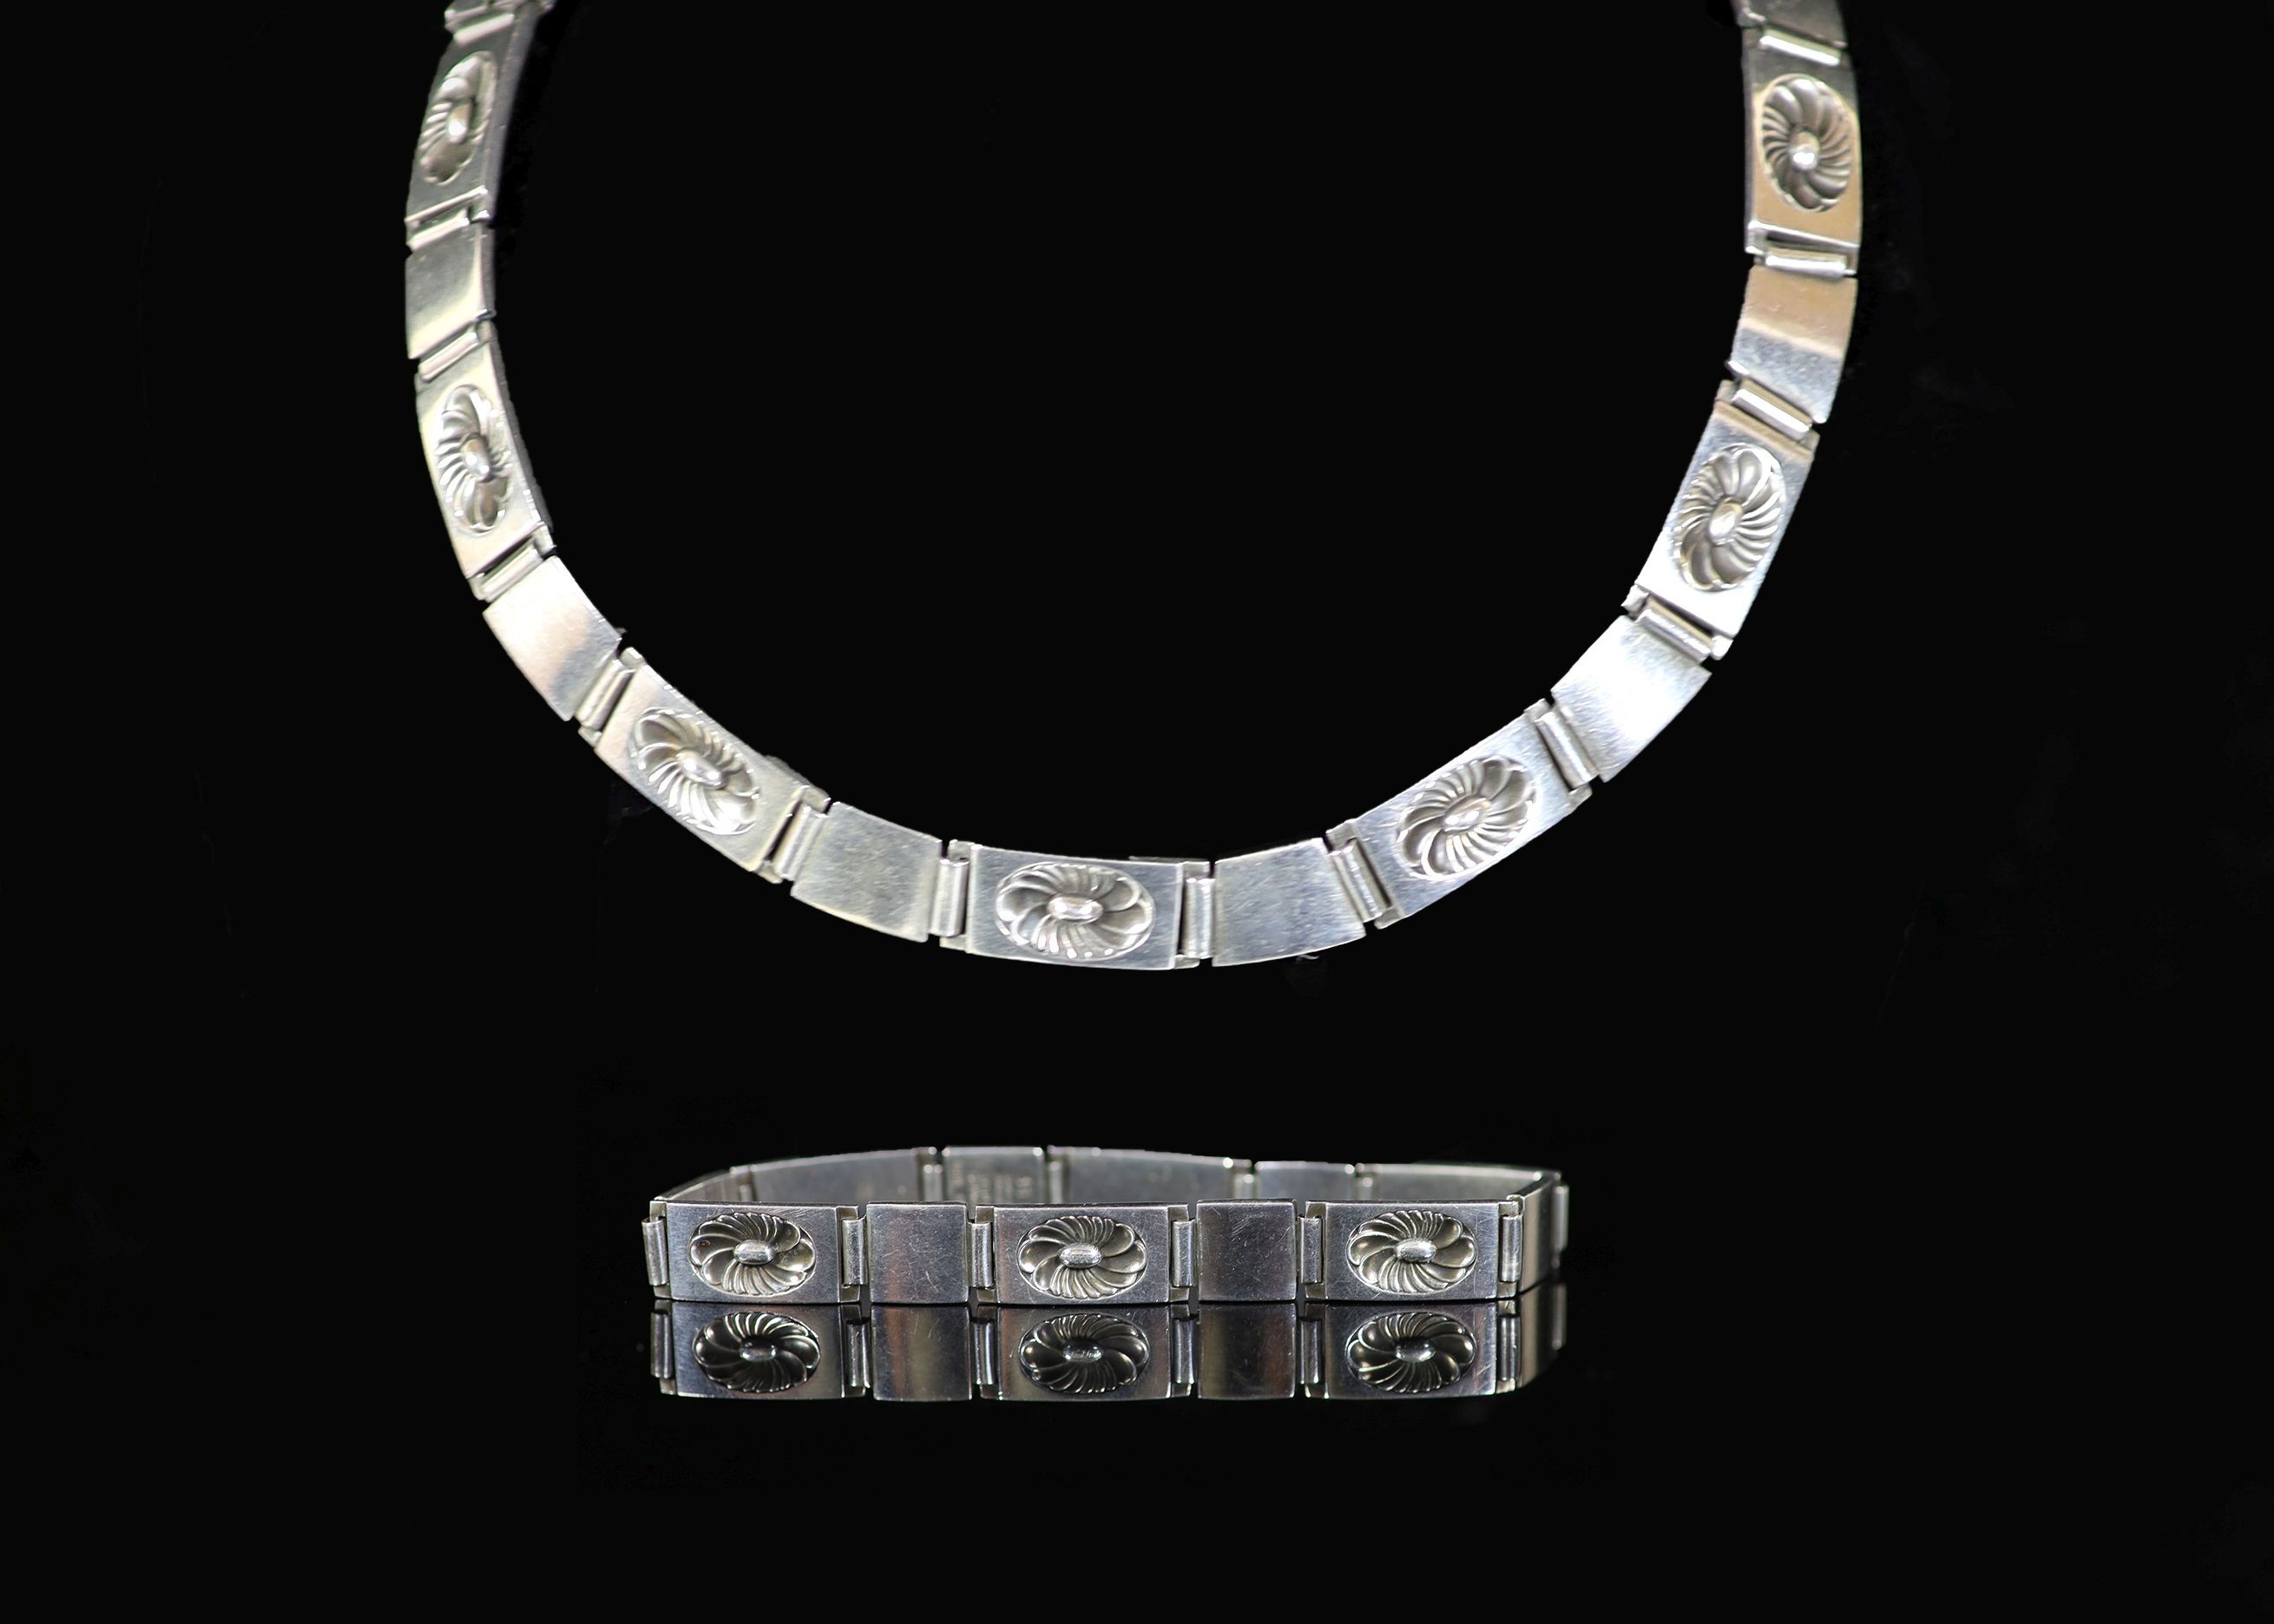 A mid 20th century Georg Jensen sterling silver necklace and matching bracelet, design no. 56 B & 60B